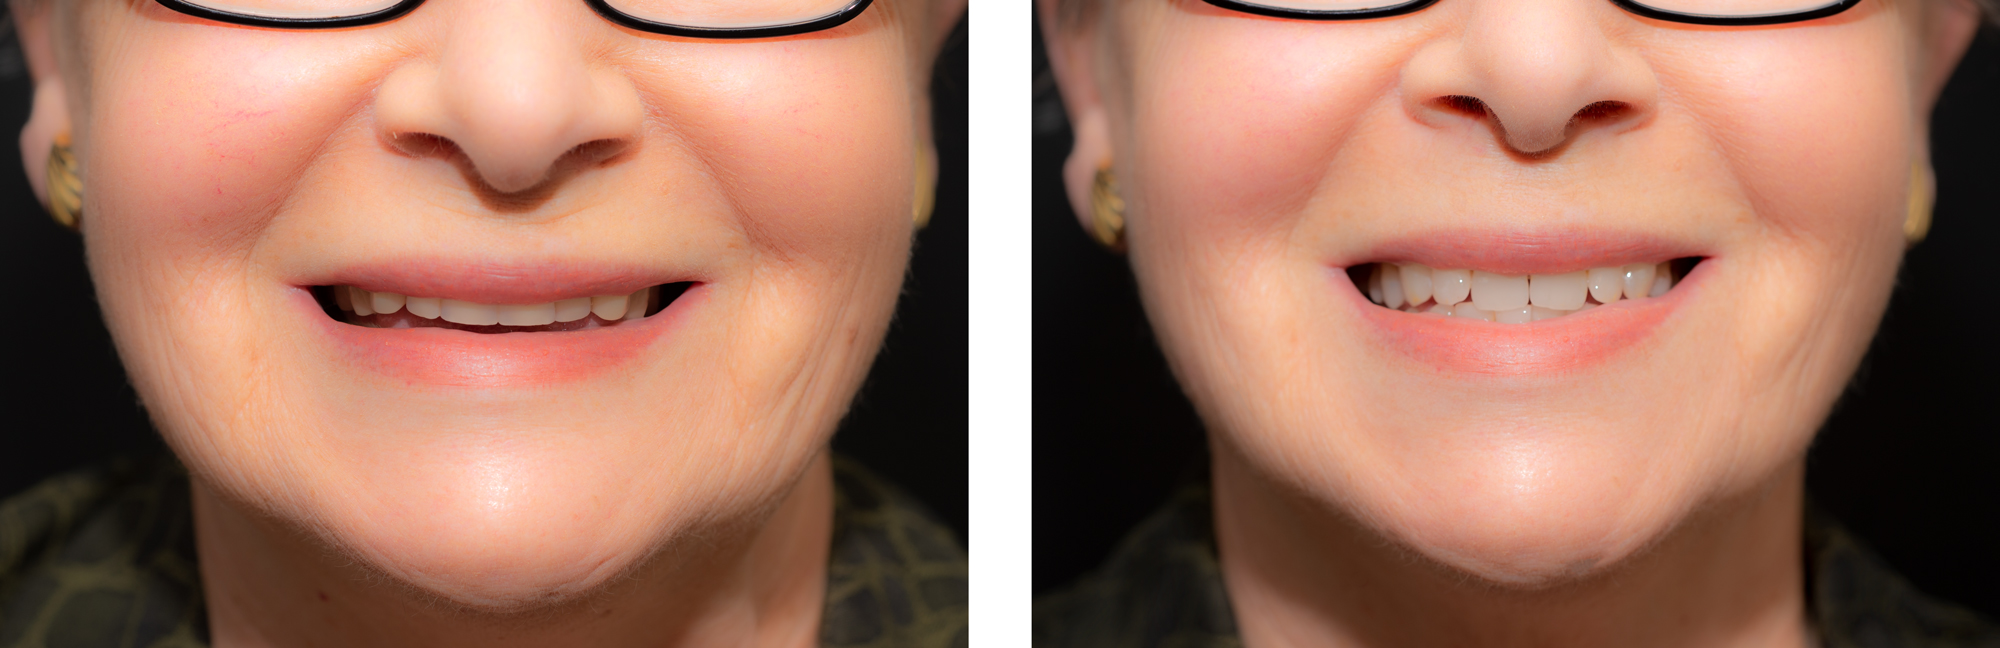 Double-Image-NO-Text-Before--After-Full-Upper--Full-Lower-Dentures-by-Ron-Winter-of-Fabulous-Teeth--Seasdide-Dental-Laboratory--Clinic.jpg